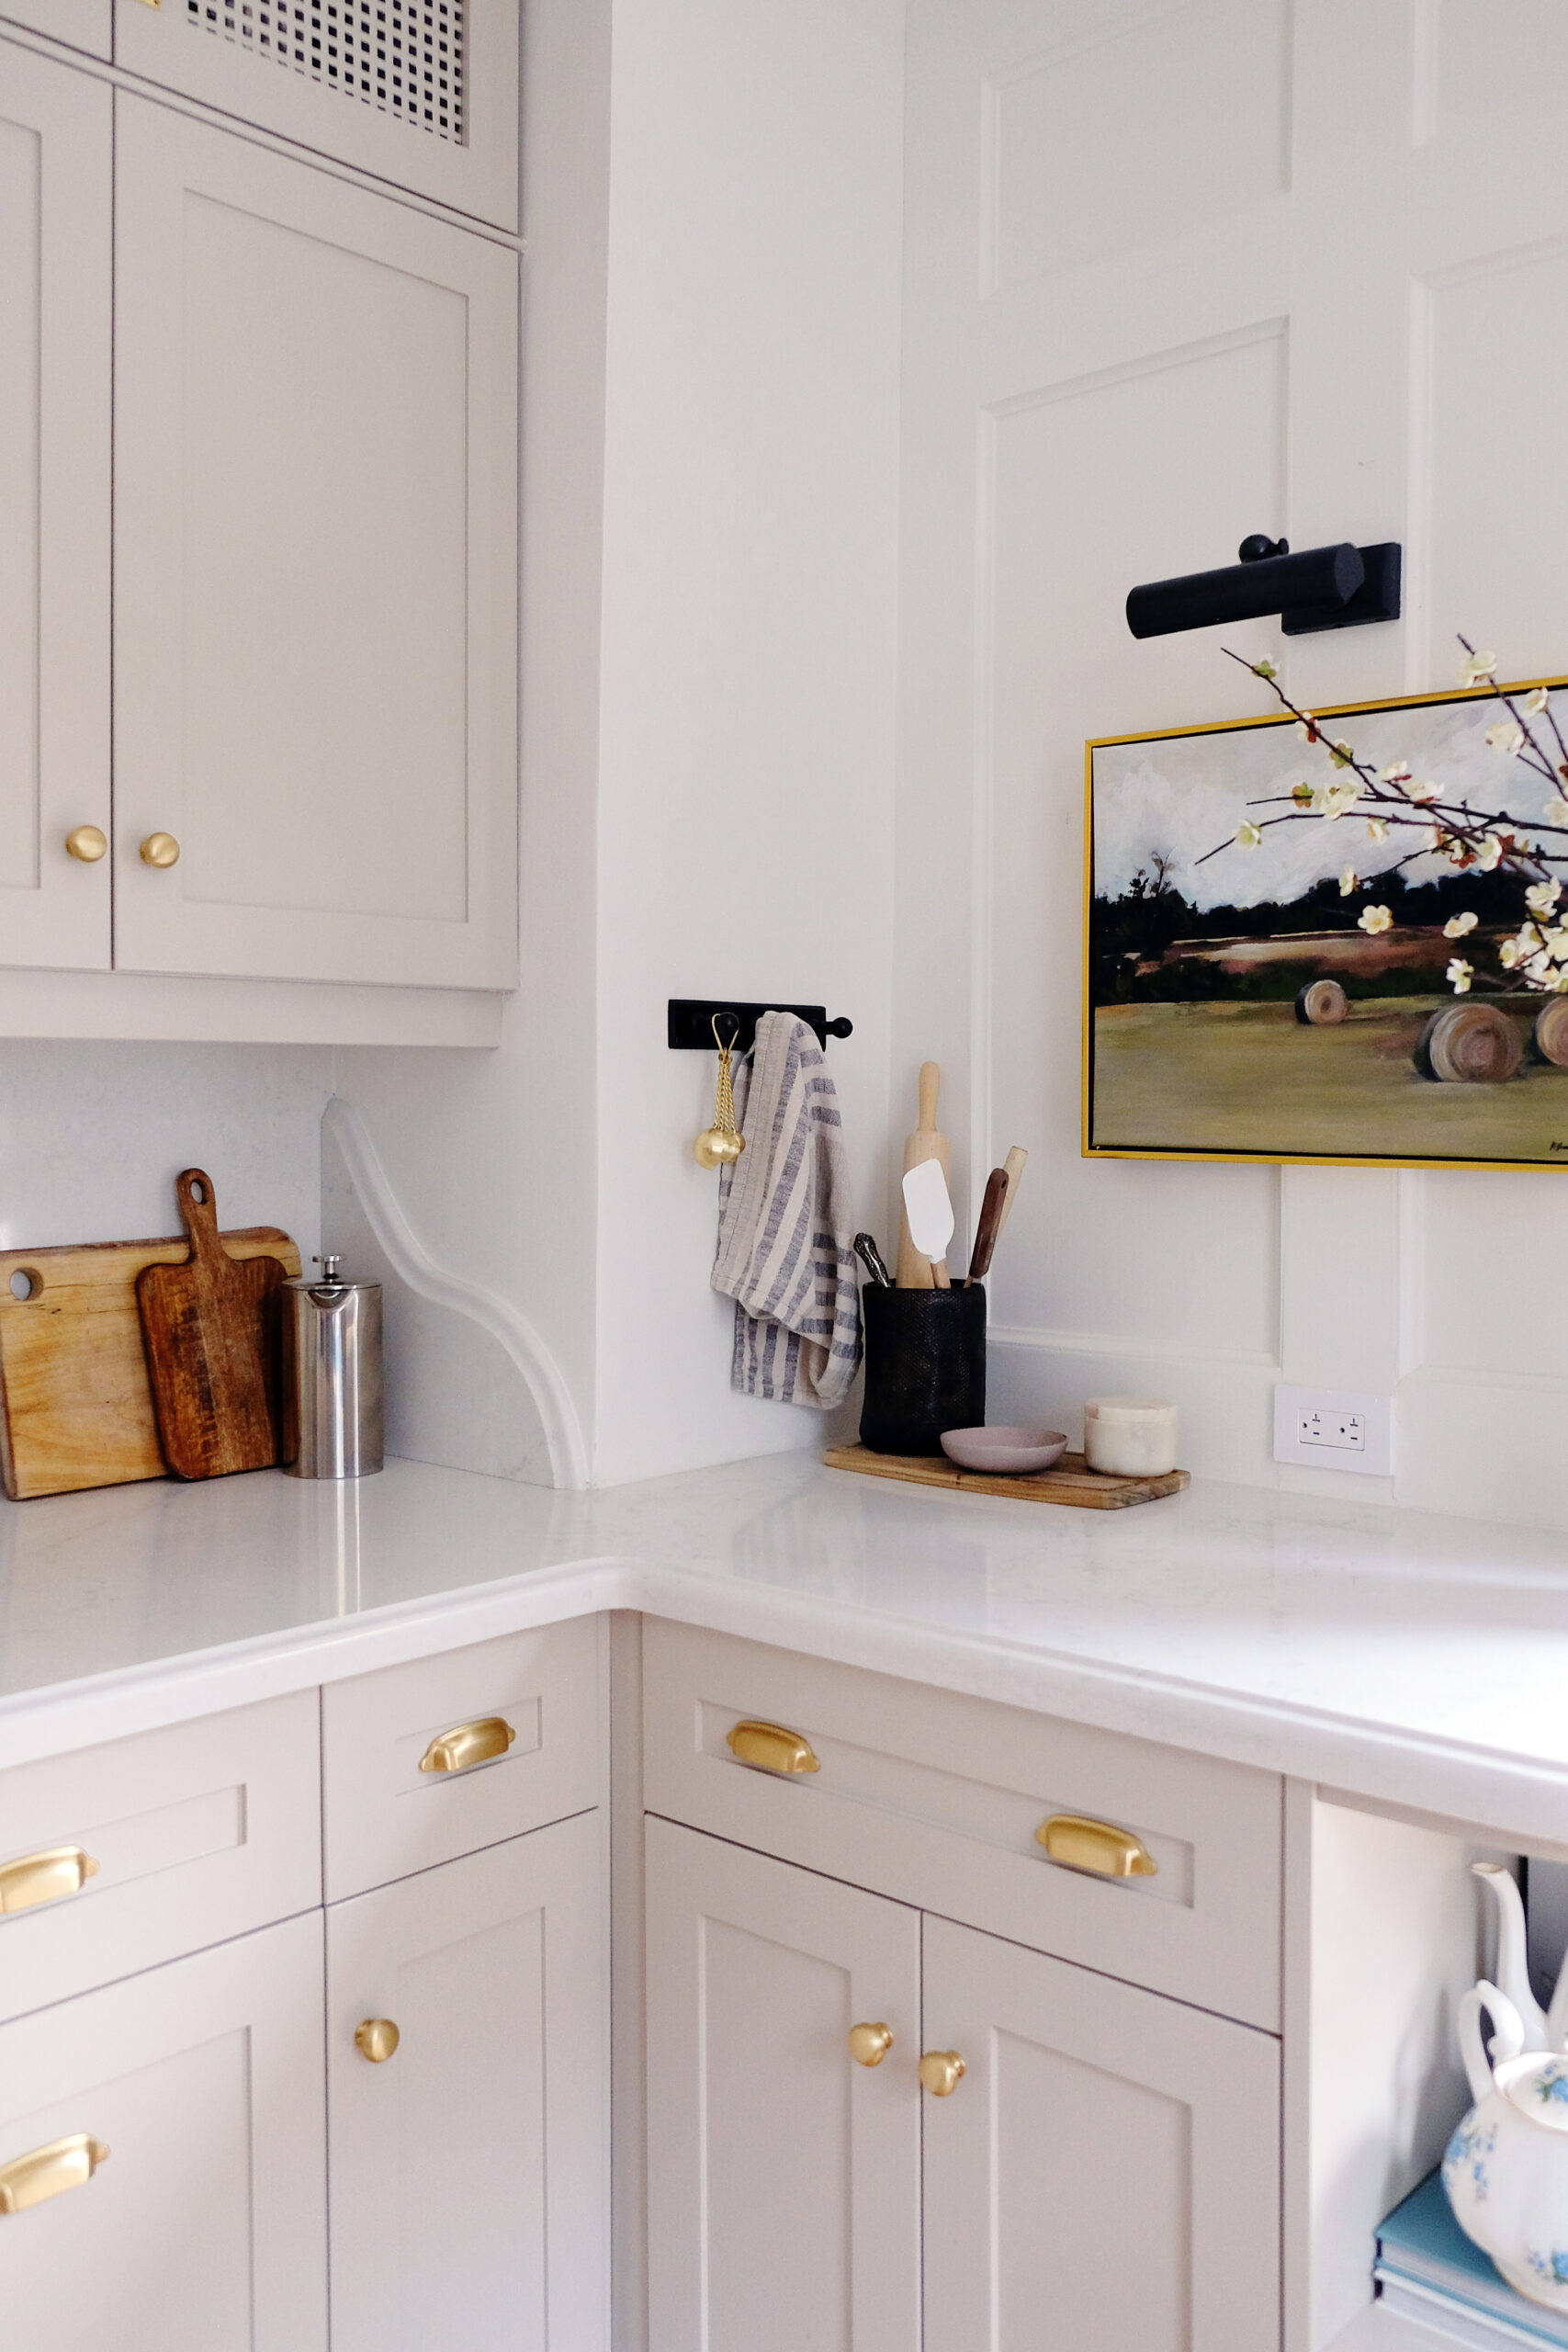 Our Timeless White and Gold Kitchen Reveal